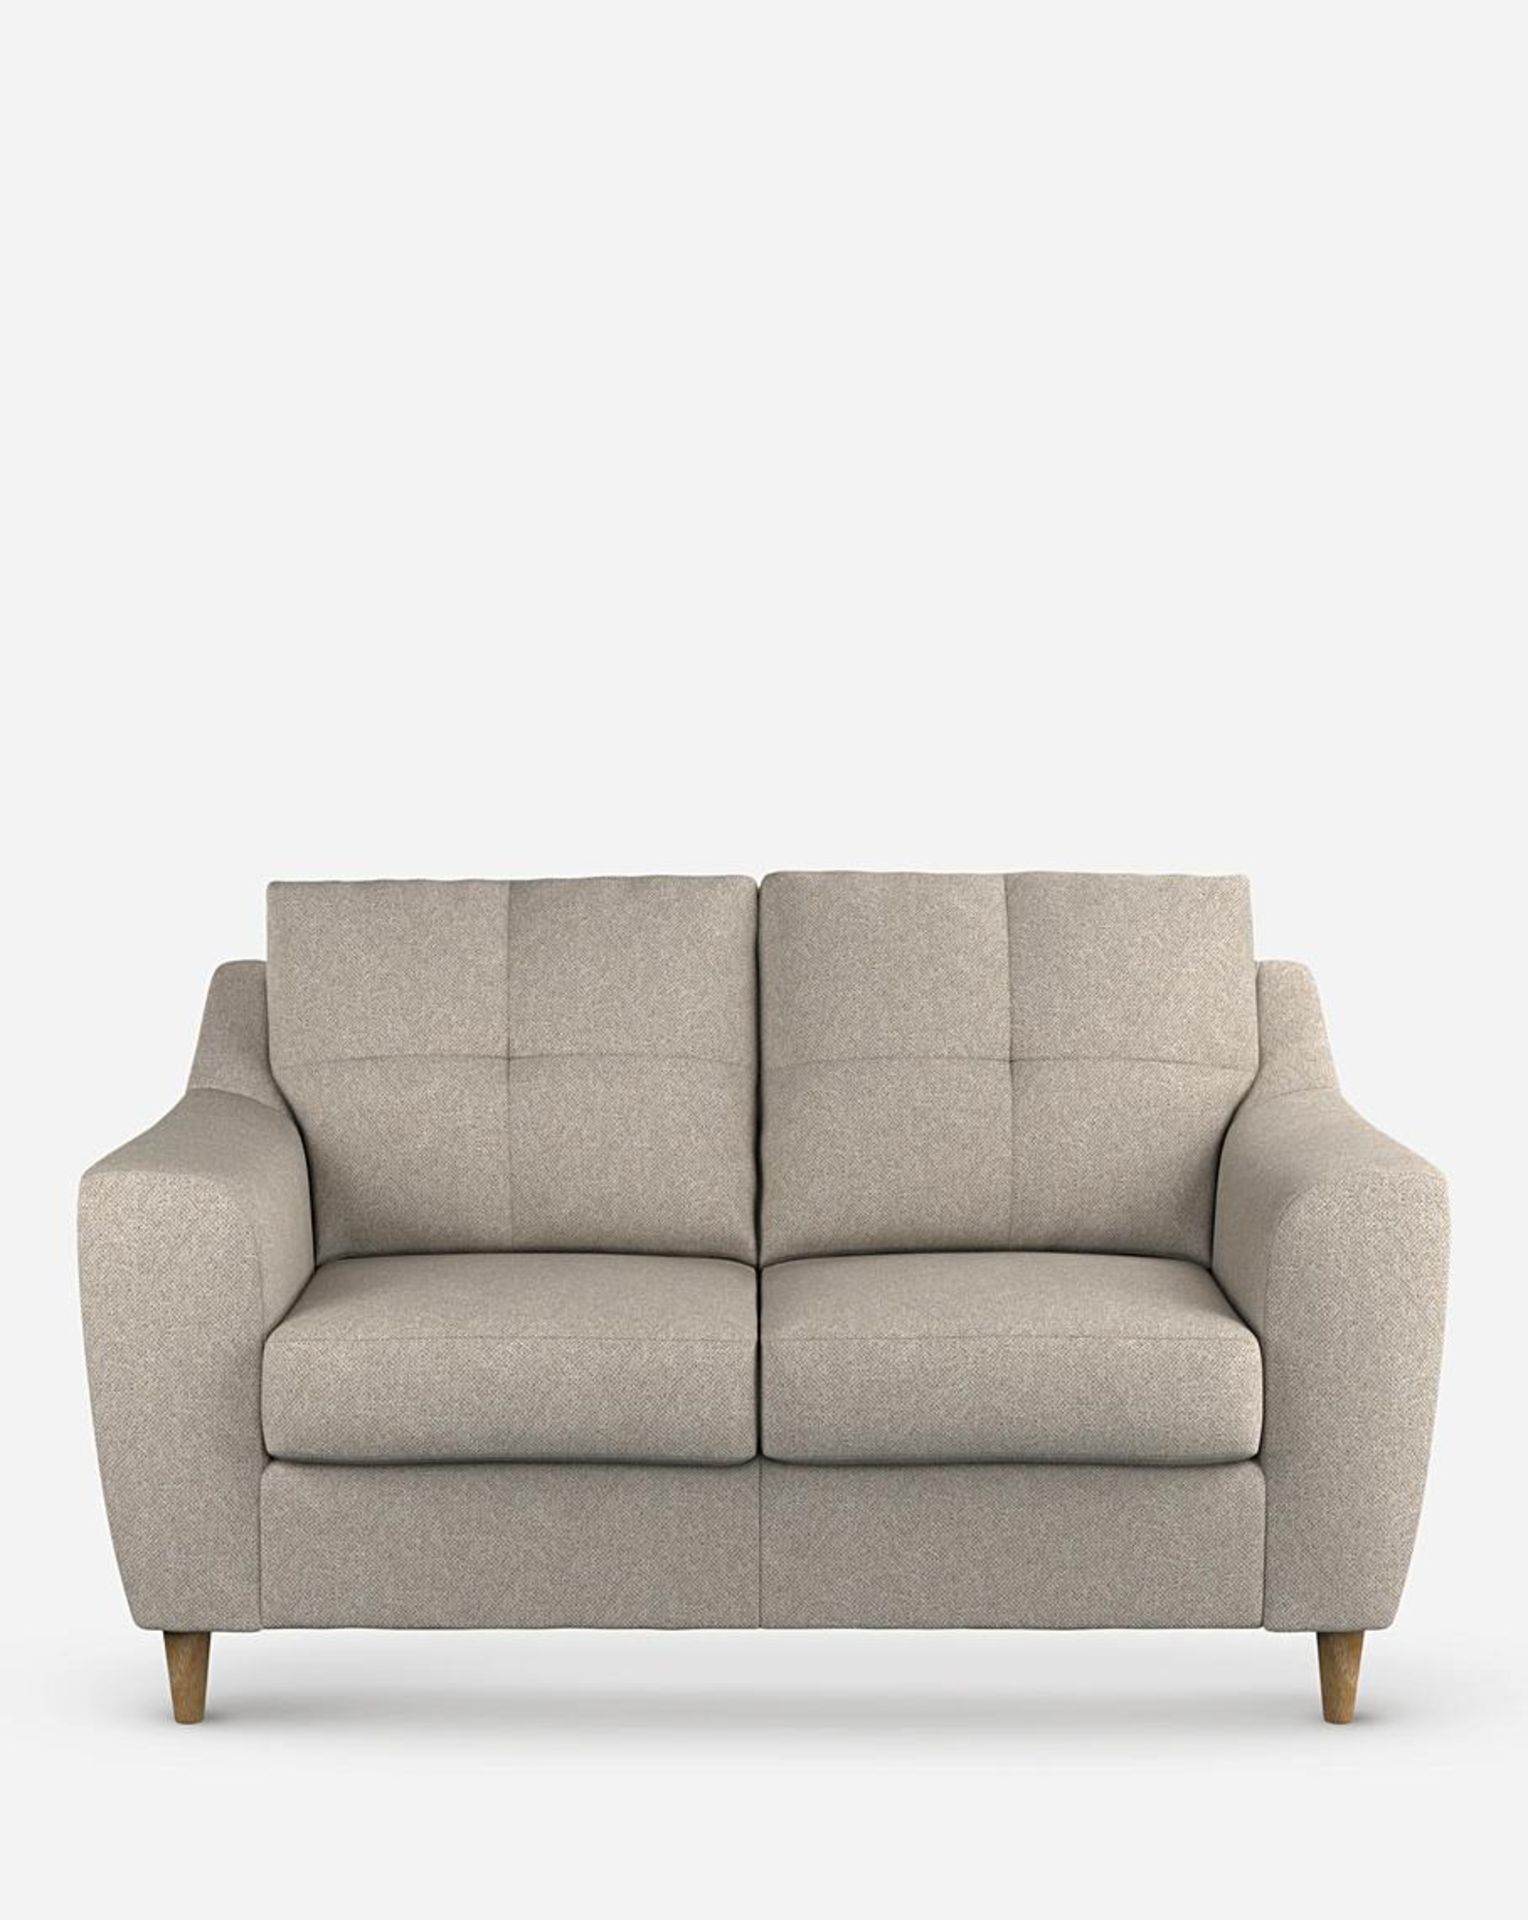 Baxter 2 Seater Sofa. RRP £499.00. - SR5. The contemporary style of the Baxter range is both on-